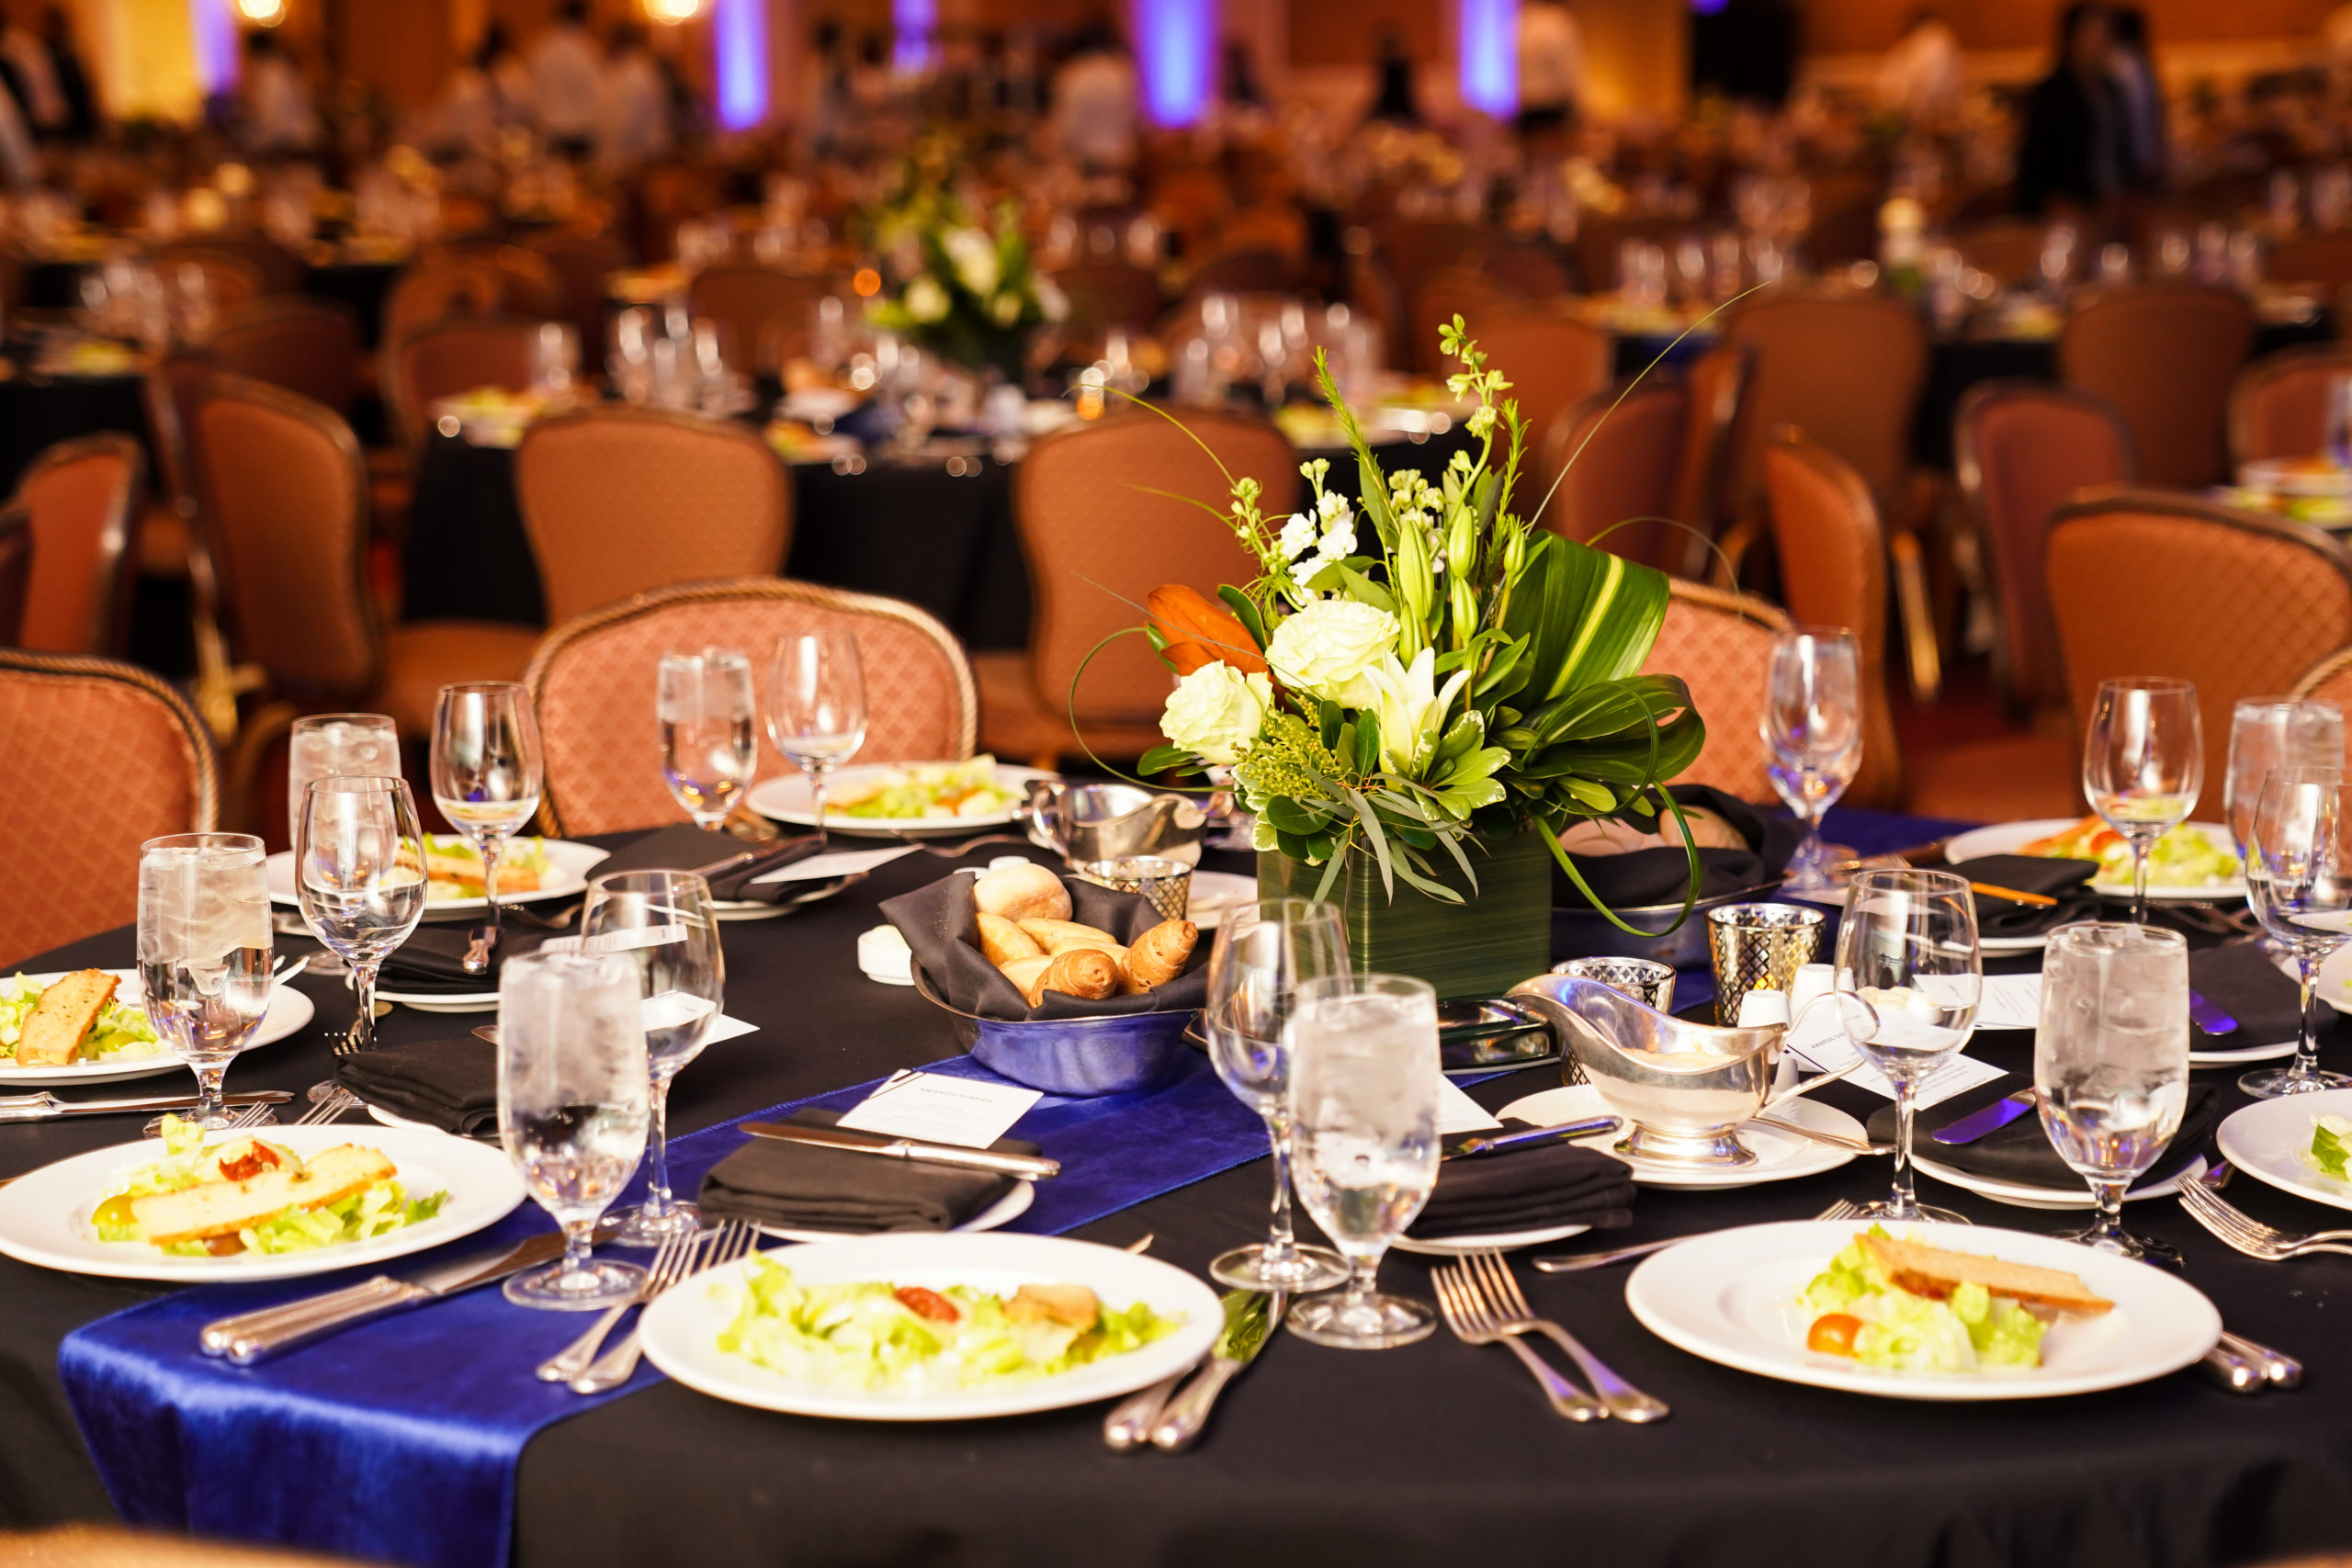 The Grand Ballroom set up for a large-scale event held at The Grand America Hotel.